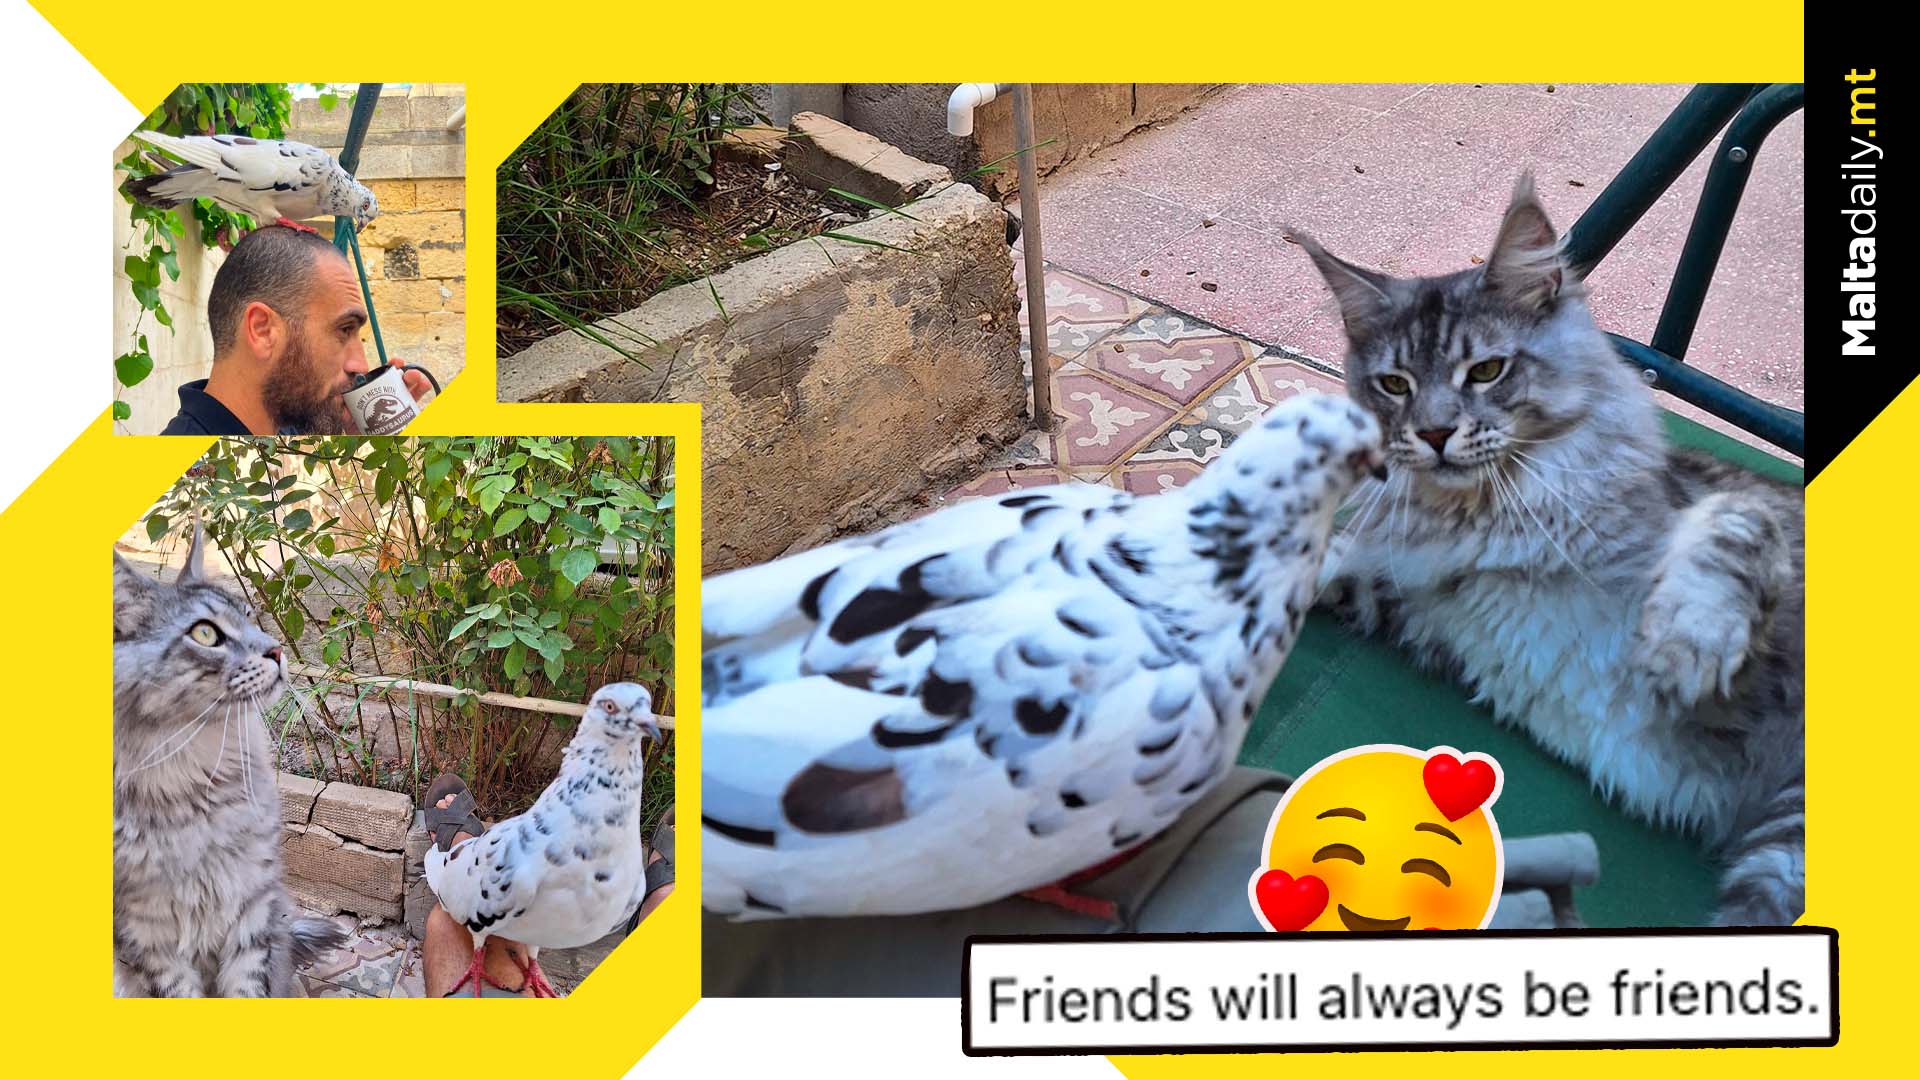 Unusual friendship between cat and squab